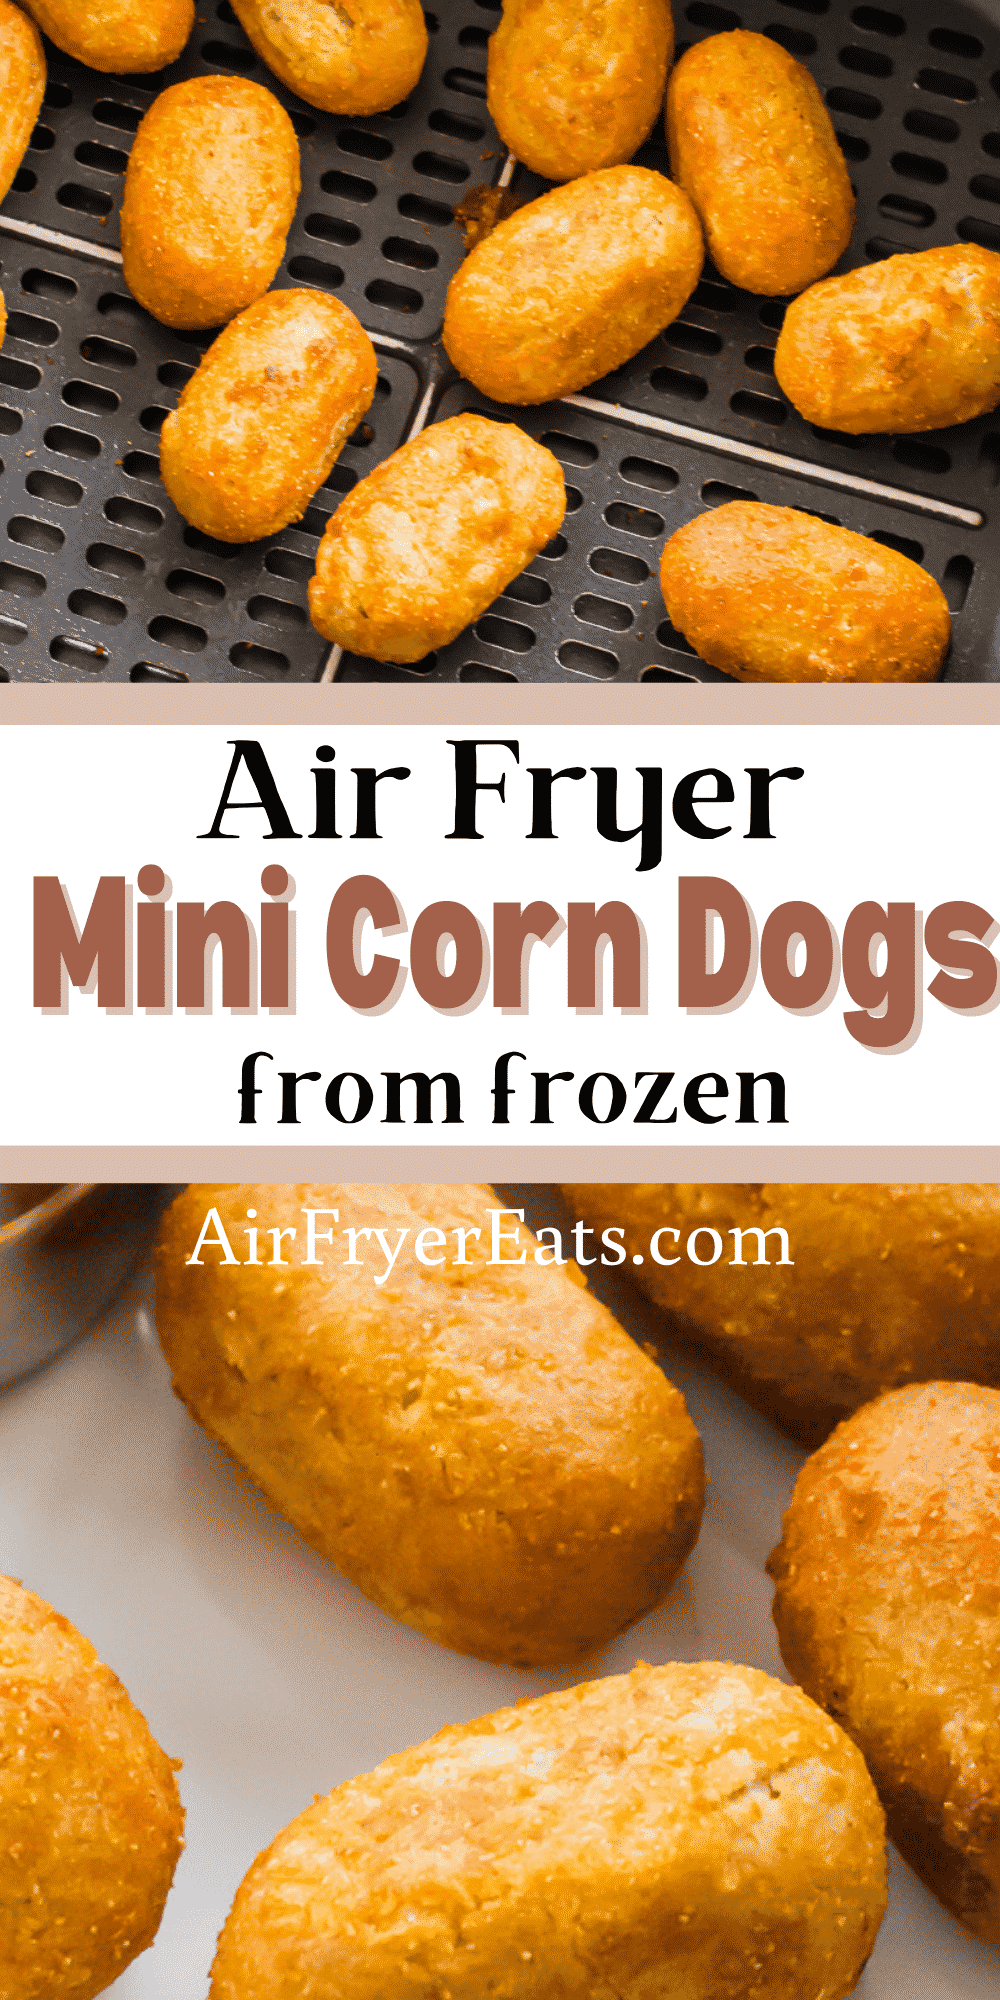 Air Fryer mini corn dogs are quick and easy appetizer to make. Serve these at a party or use them for a kid friendly dinner or lunch option. #air fryer #snacks #fairfood via @vegetarianmamma